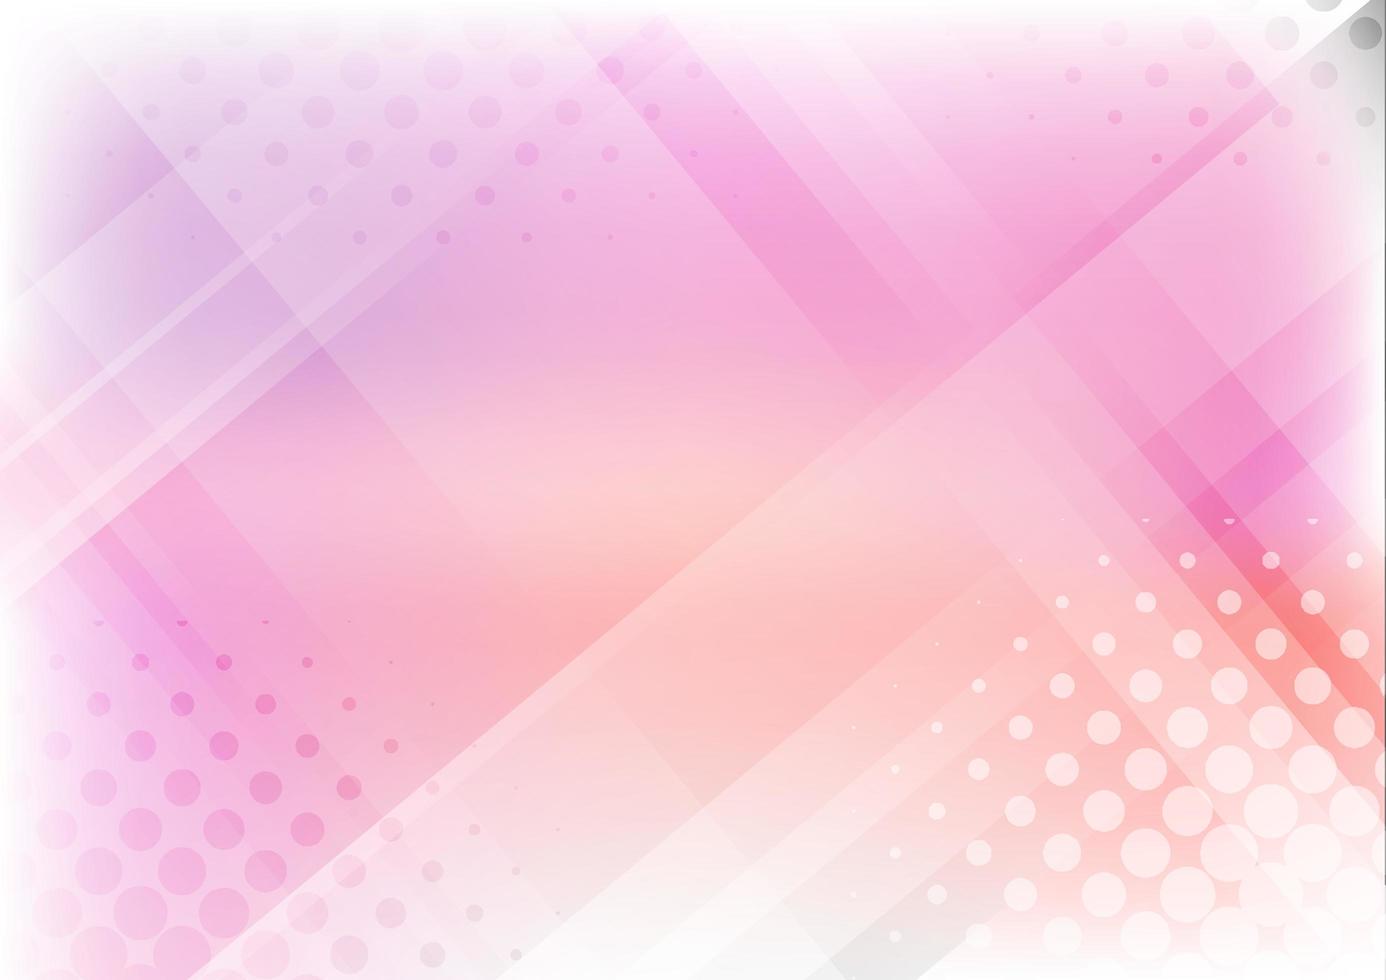 Abstract background pink and gray geometric shapes overlapping. vector